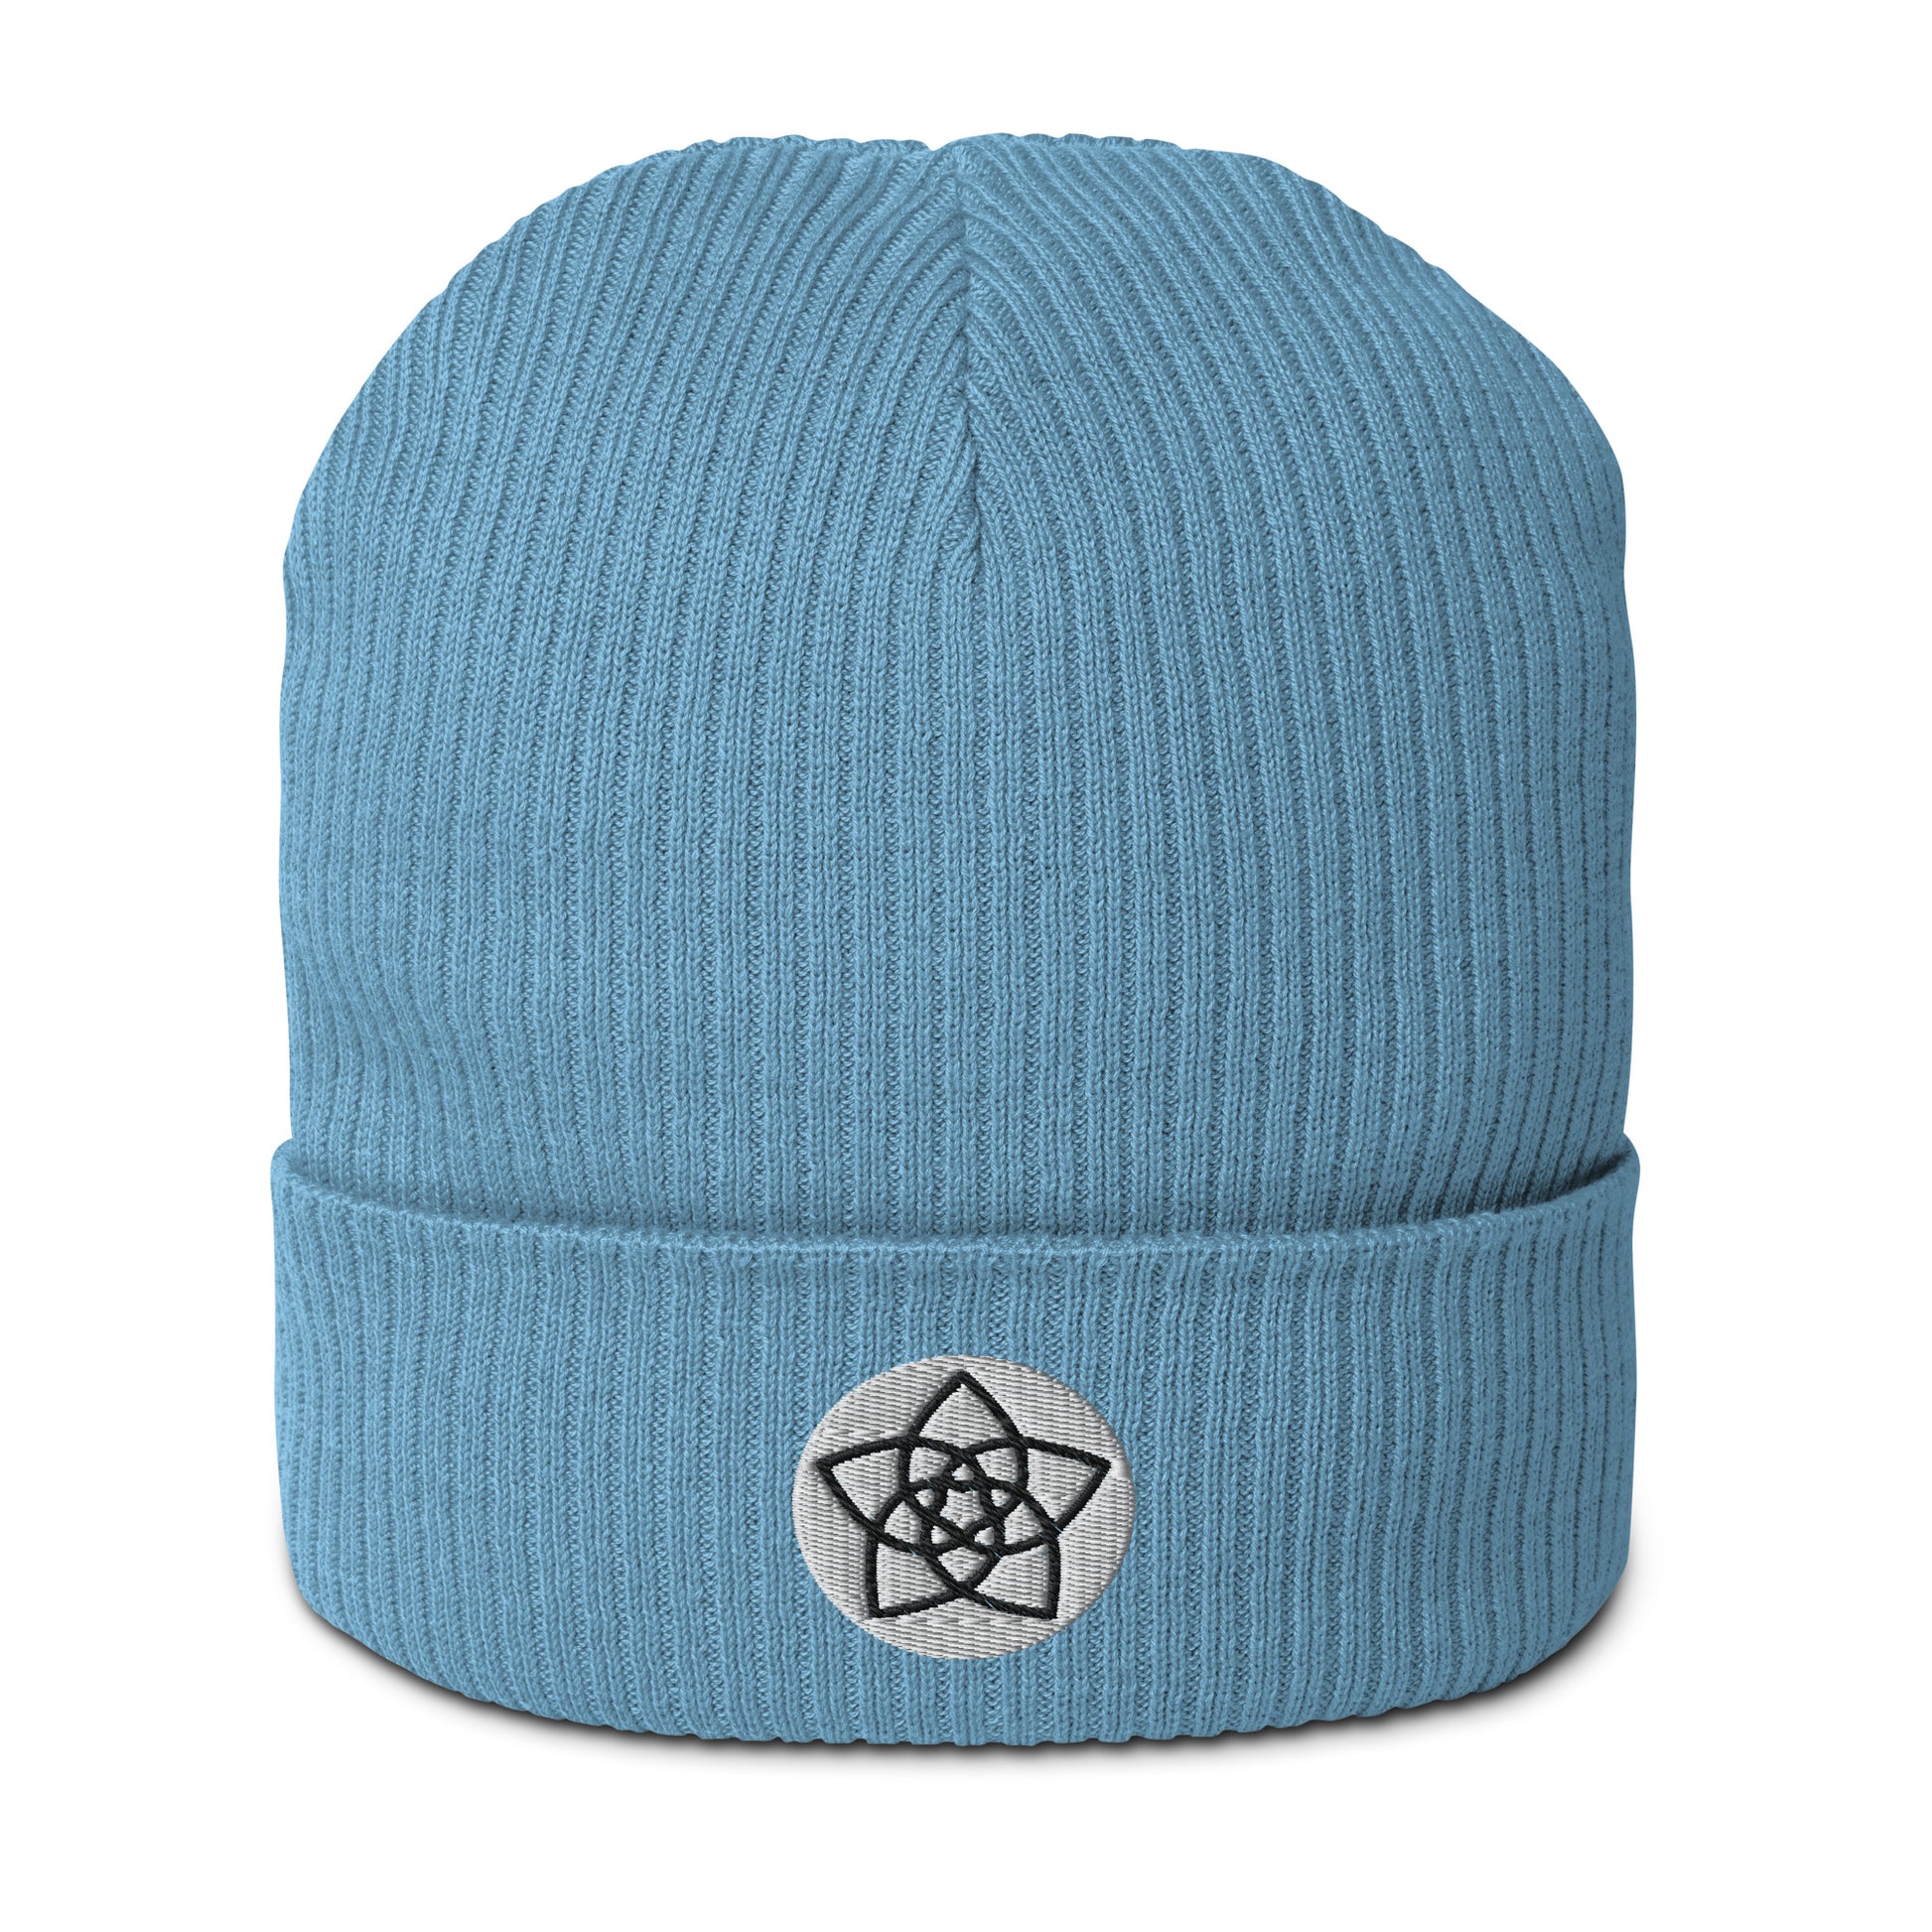 Tune into your inner goddess with our Venus Flower Organic Cotton Beanie in Bermuda Blue. Crafted from organic cotton and embroidered with the Venus Flower symbol, this beanie is a tribute to the divine feminine, blooming with unity, balance, and celestial connections. Plus, it's made with breathable, lightweight fabric and natural materials, ensuring you feel as light as a petal while you're on your celestial journey. Snatch one of these beanies and infuse your style with a touch of Venusian magic.